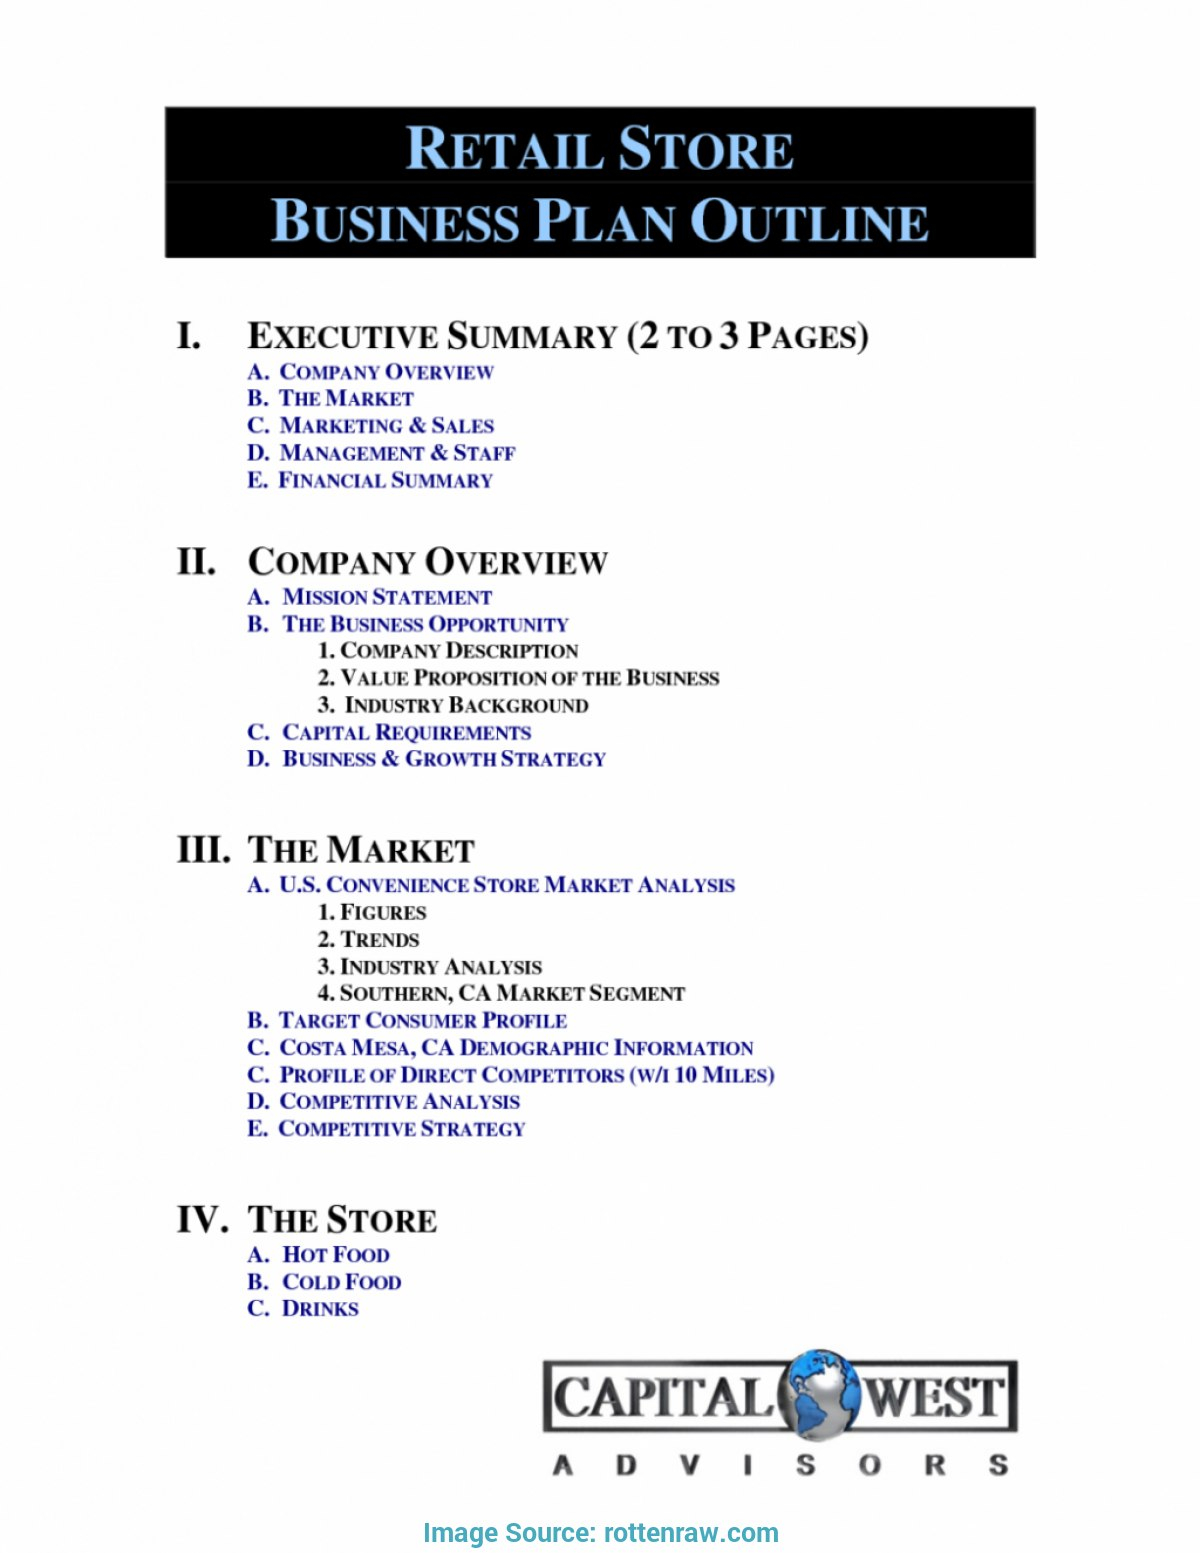 Typical Business Plan Format Slideshare Best Images Of Online for Retail Business Proposal Template